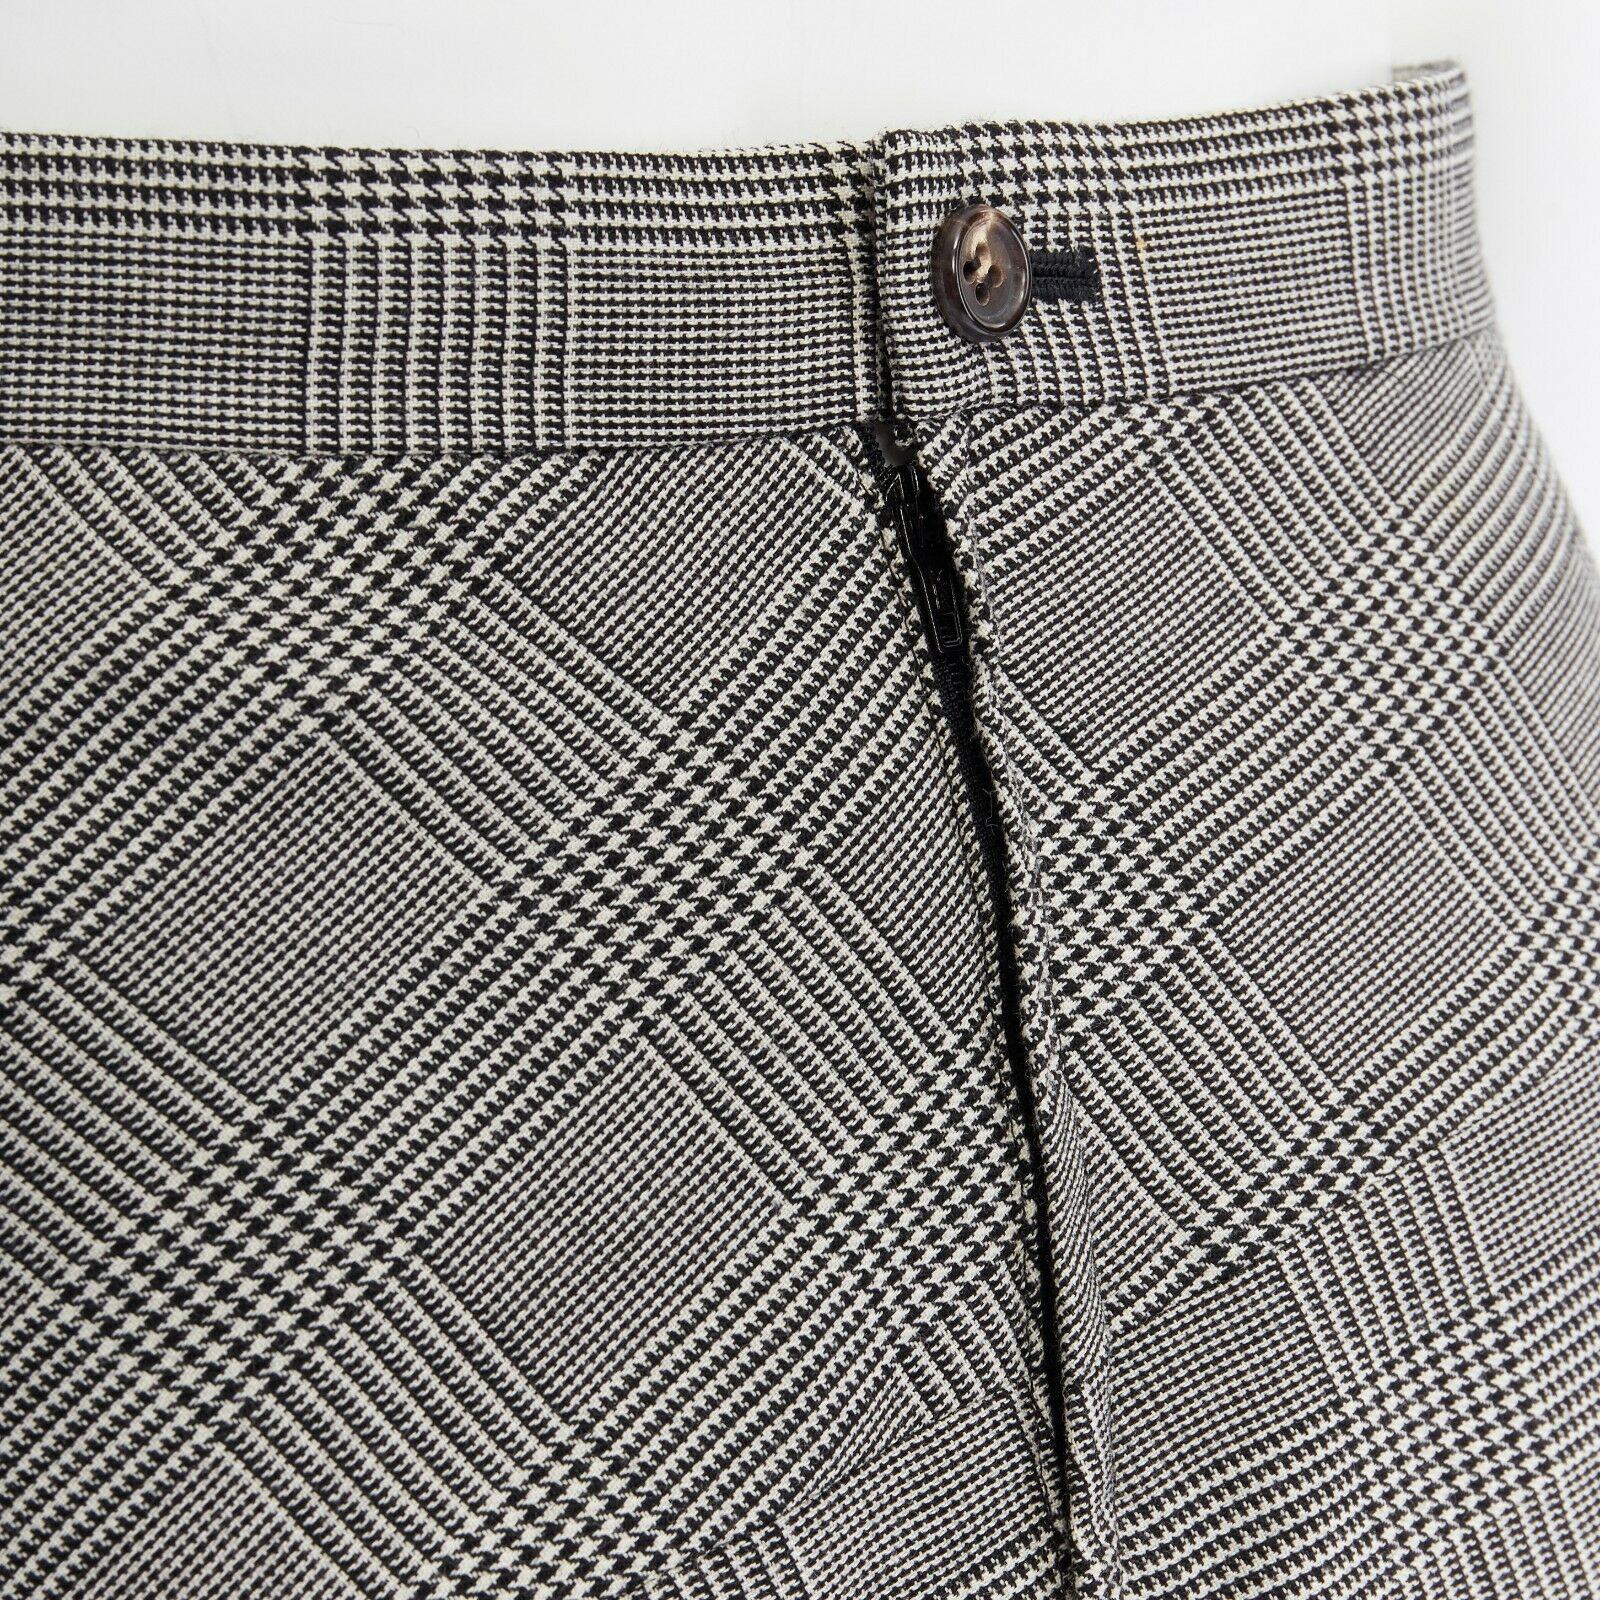 COMME DES GARCONS grey Prince of Wales check curved seam A-line skirt 26